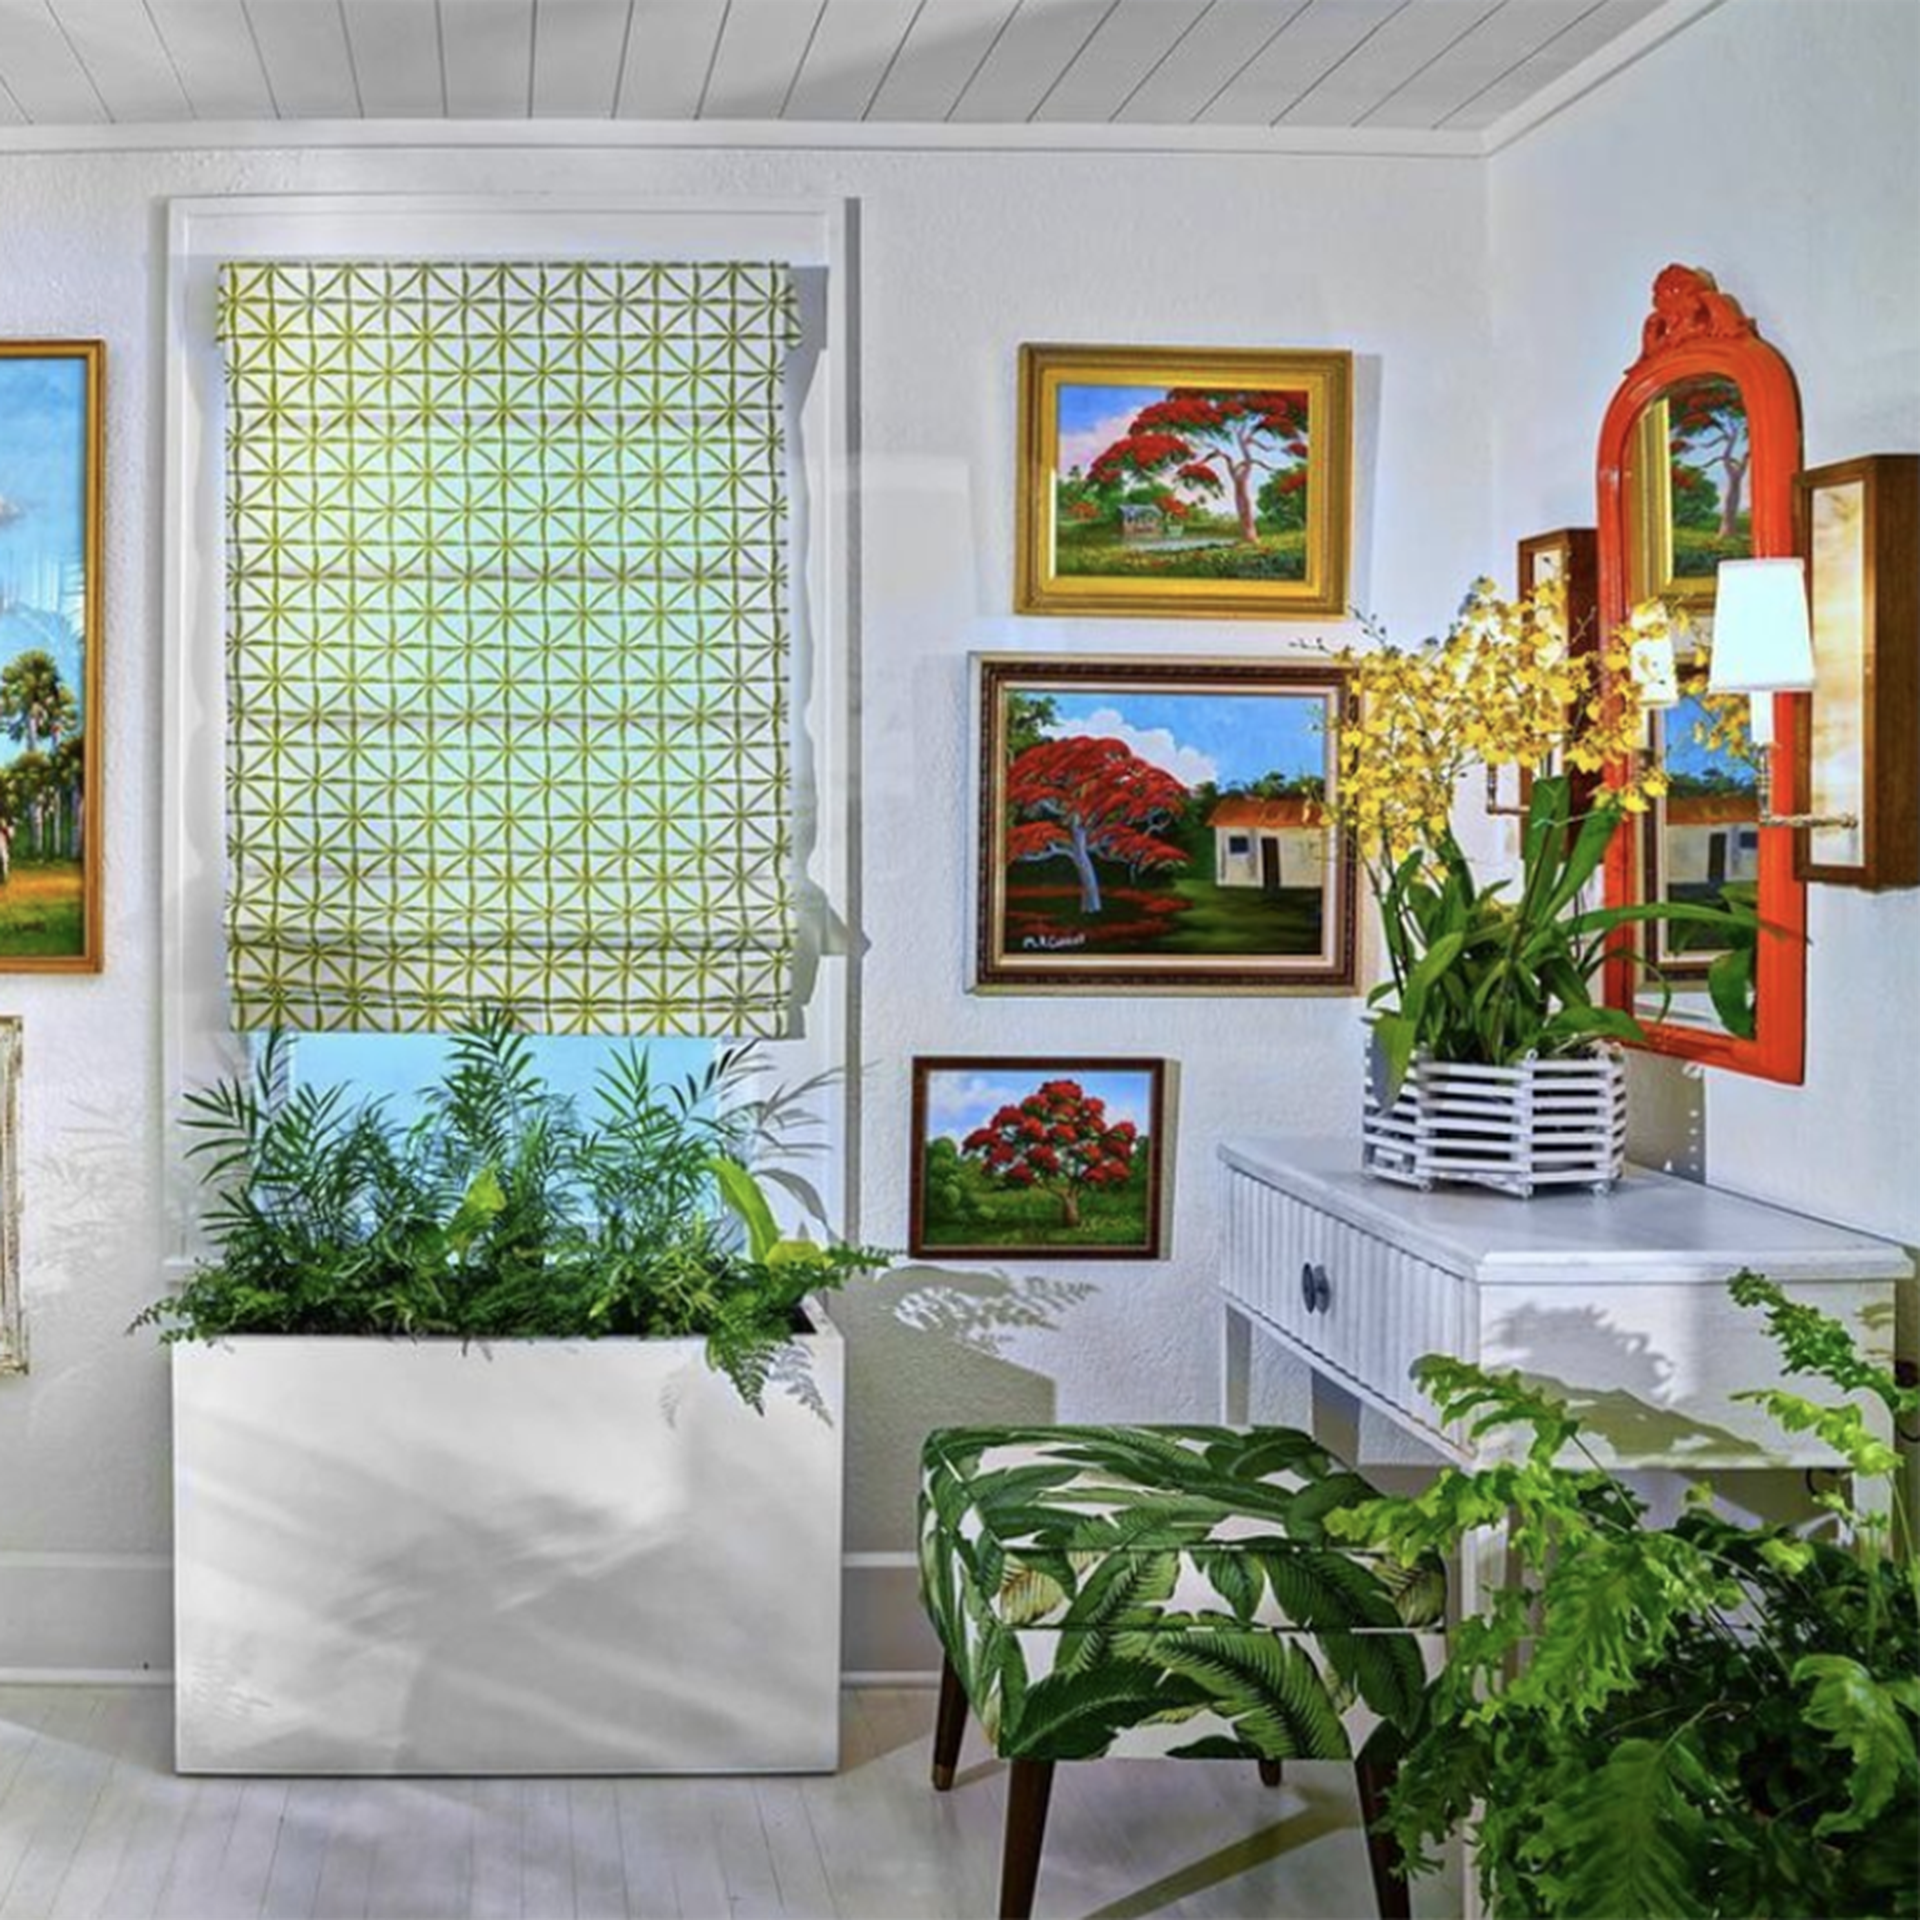  Peek inside Florida's most chic and sunshiny home